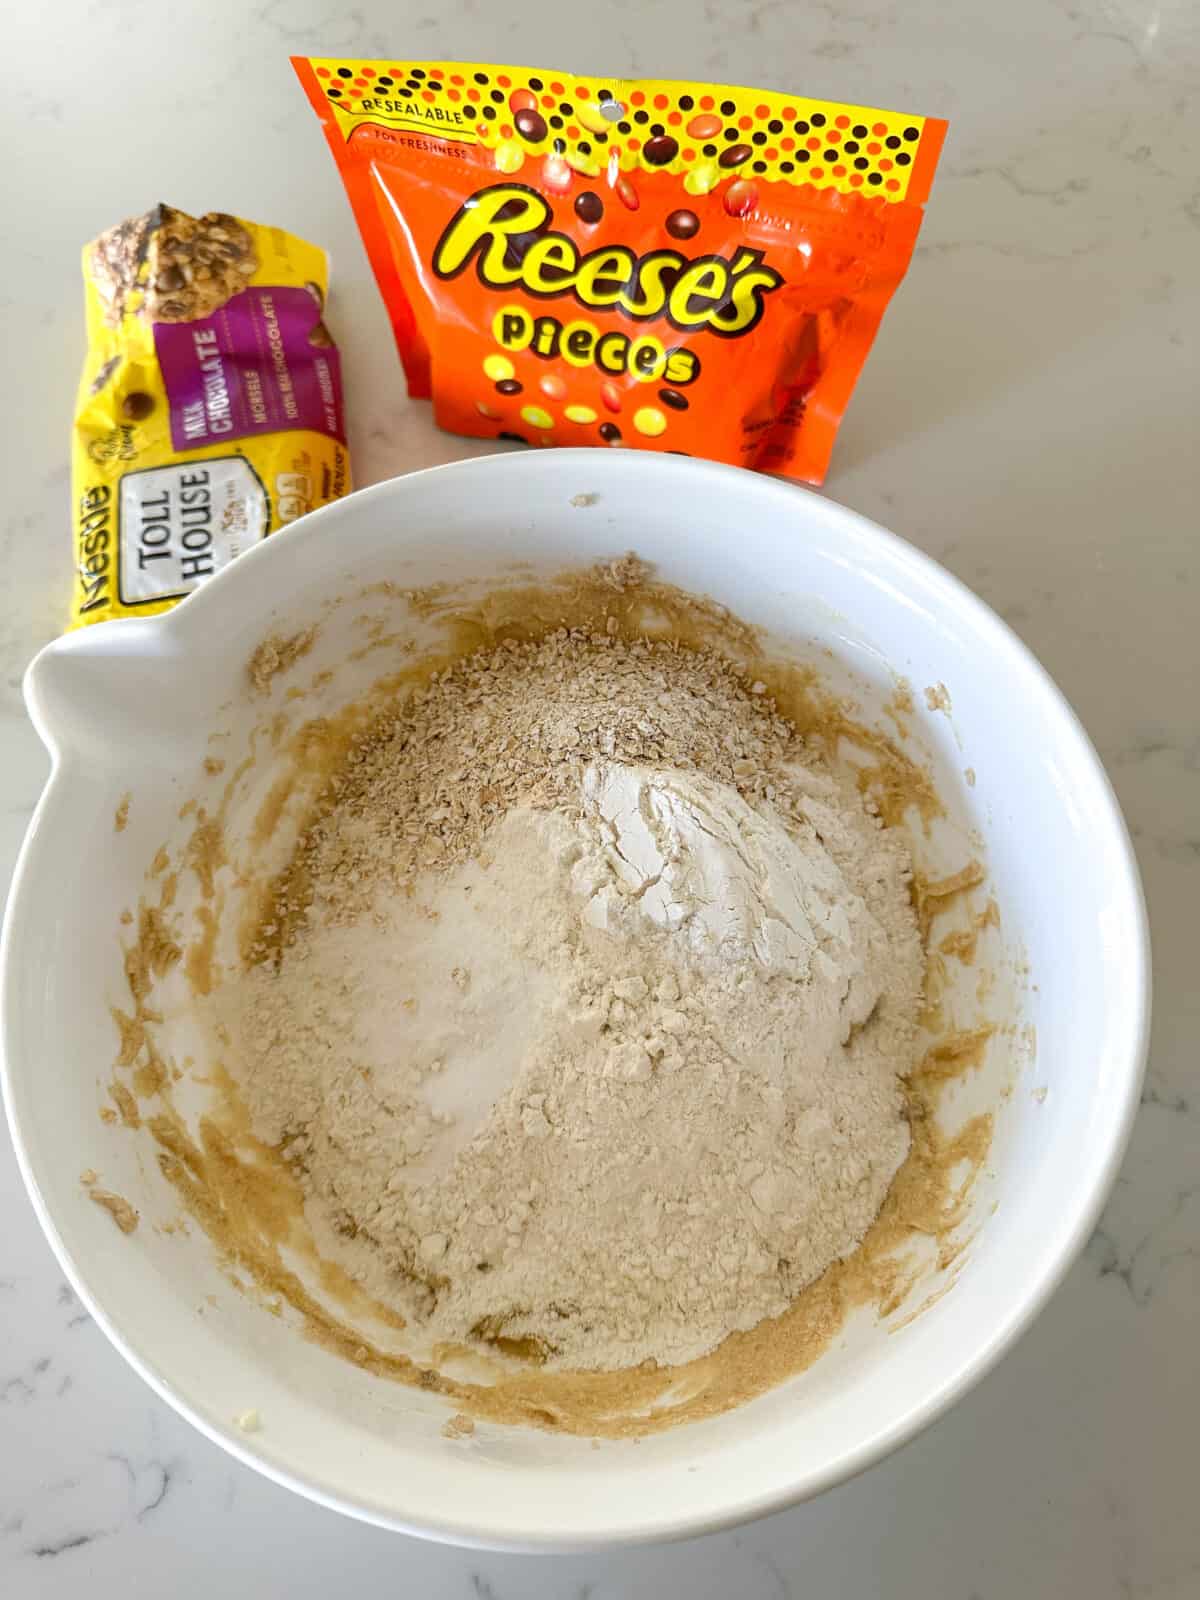 dry ingredients for reese's pieces cookies in bowl